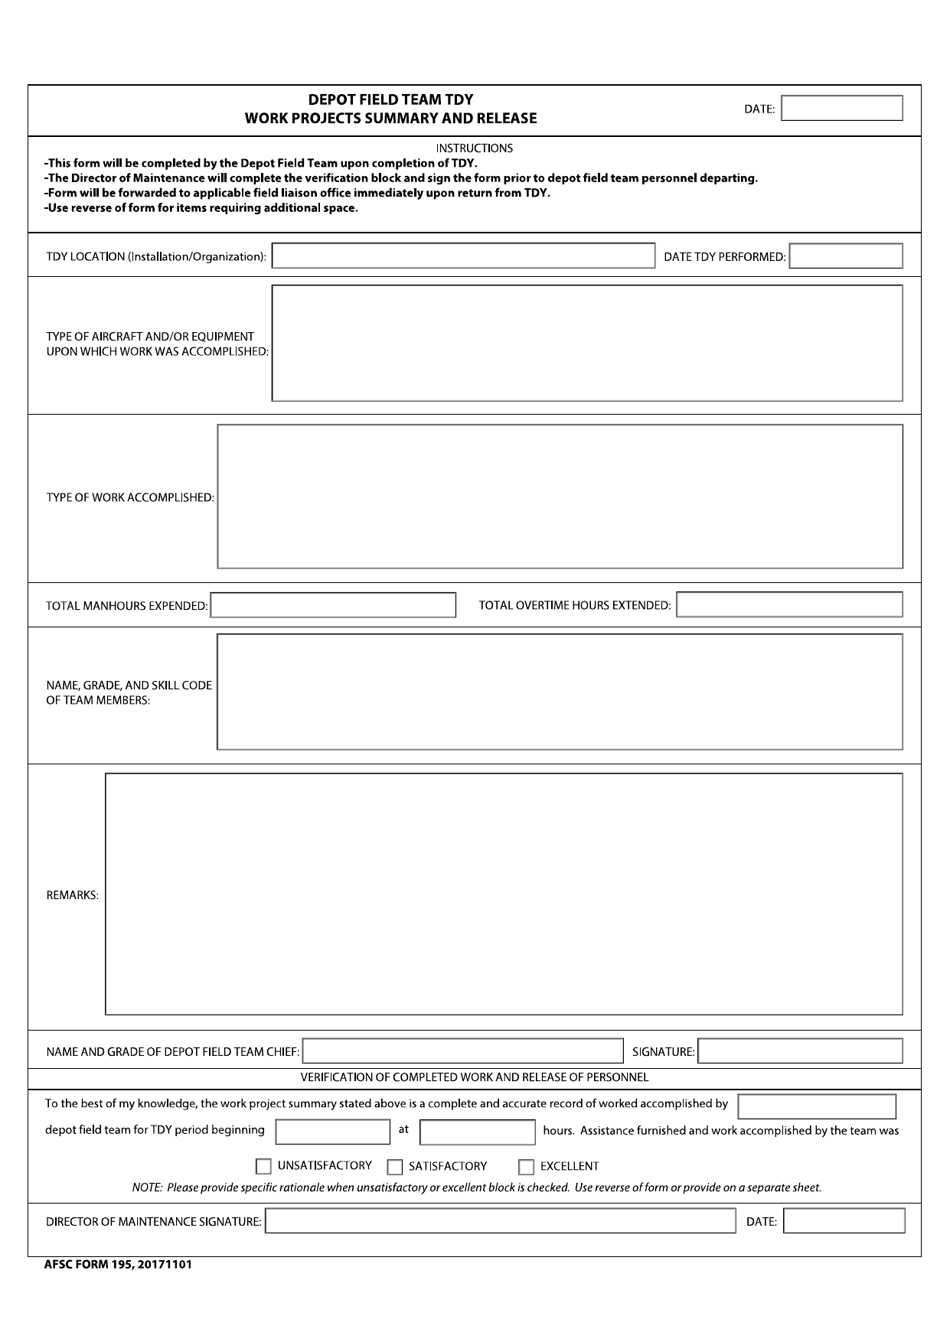 AFSC Form 195 Depot Field Team TDY Work Projects Summary and Release, Page 1